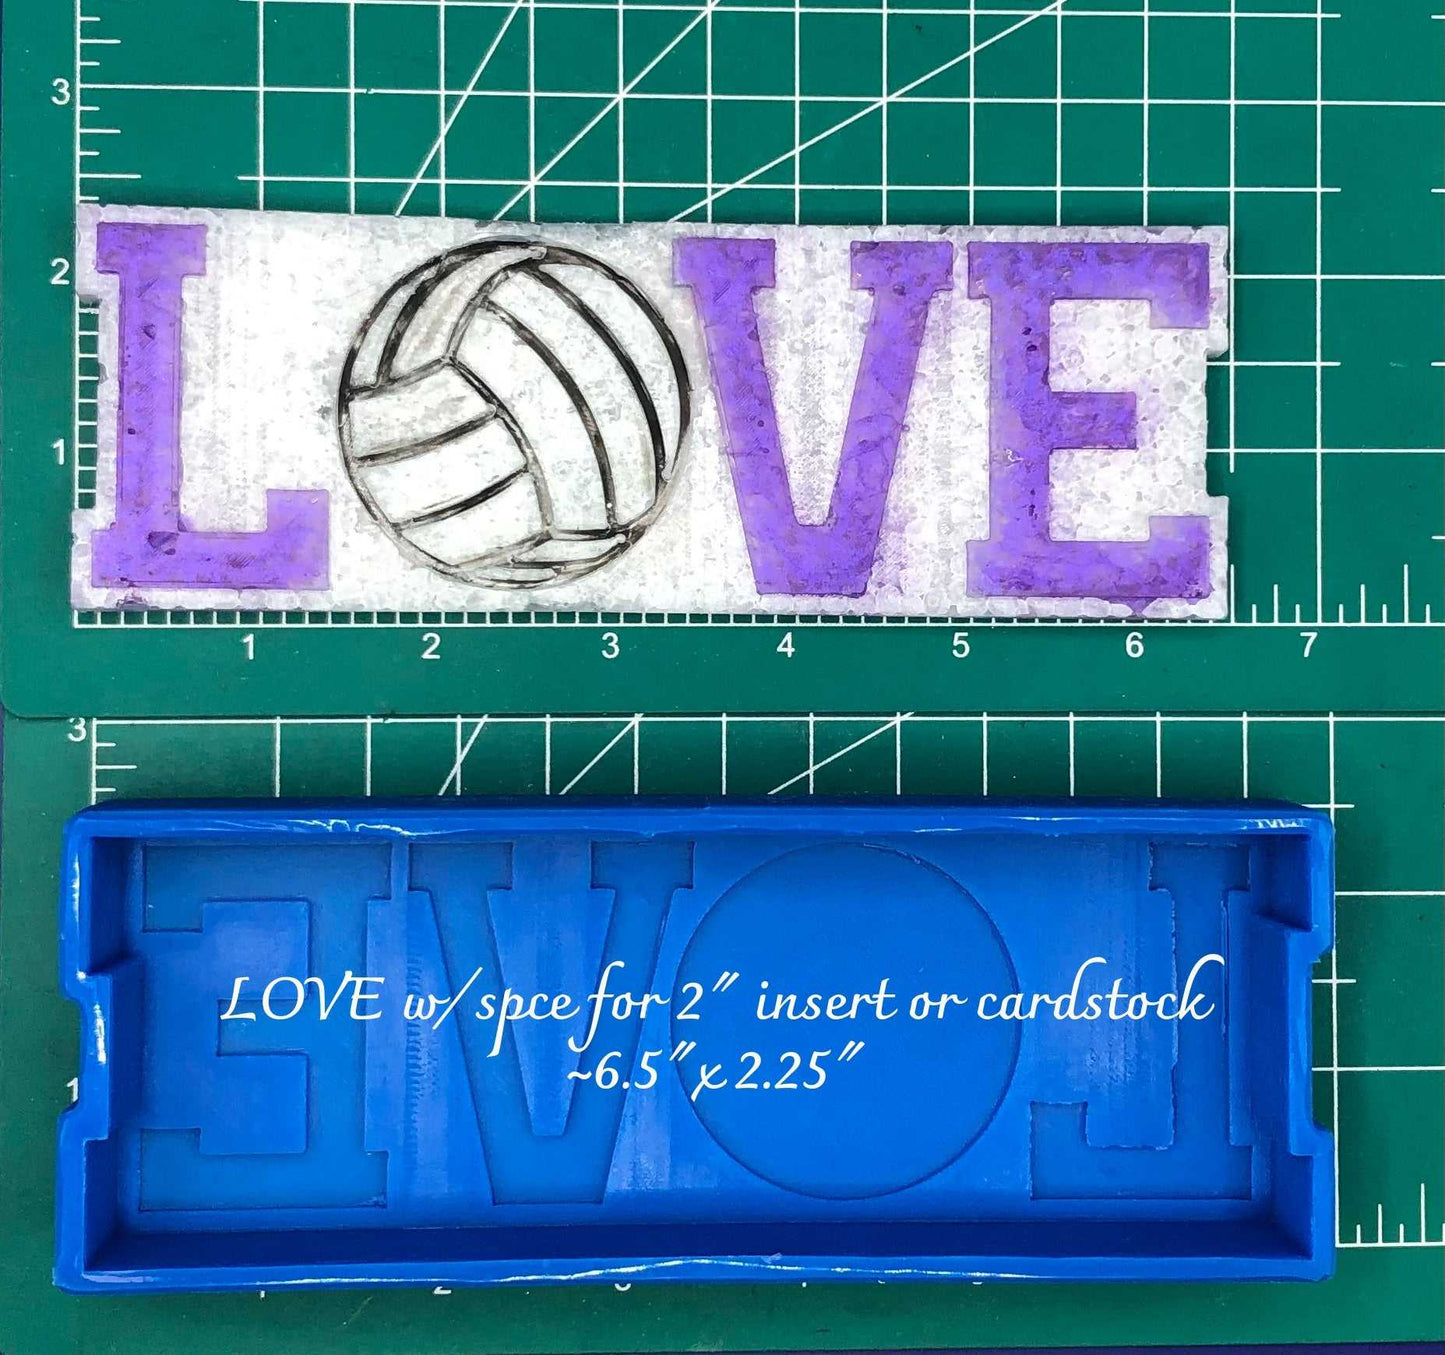 LOVE for 2" Inserts or Cardstock - Silicone Freshie Mold - Silicone Mold